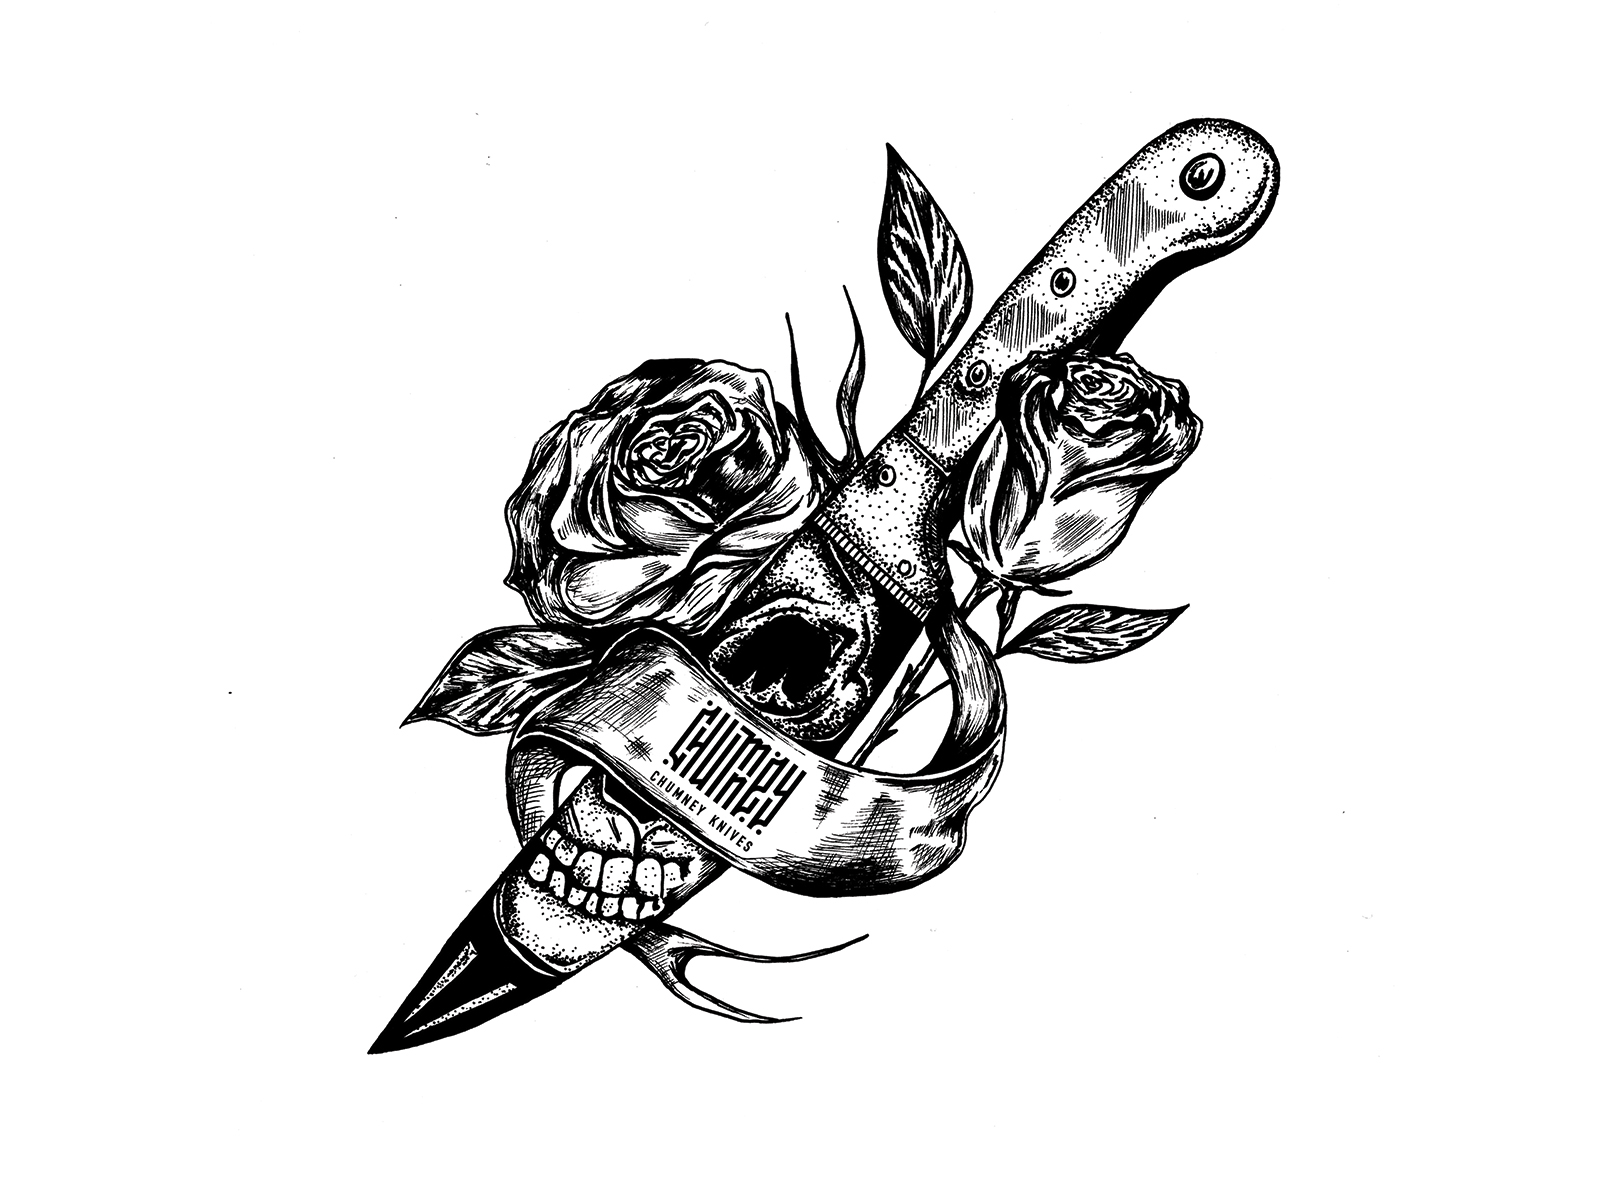 Knife Illustration / Tattoo Design with roses by Hoot Design Studio on  Dribbble